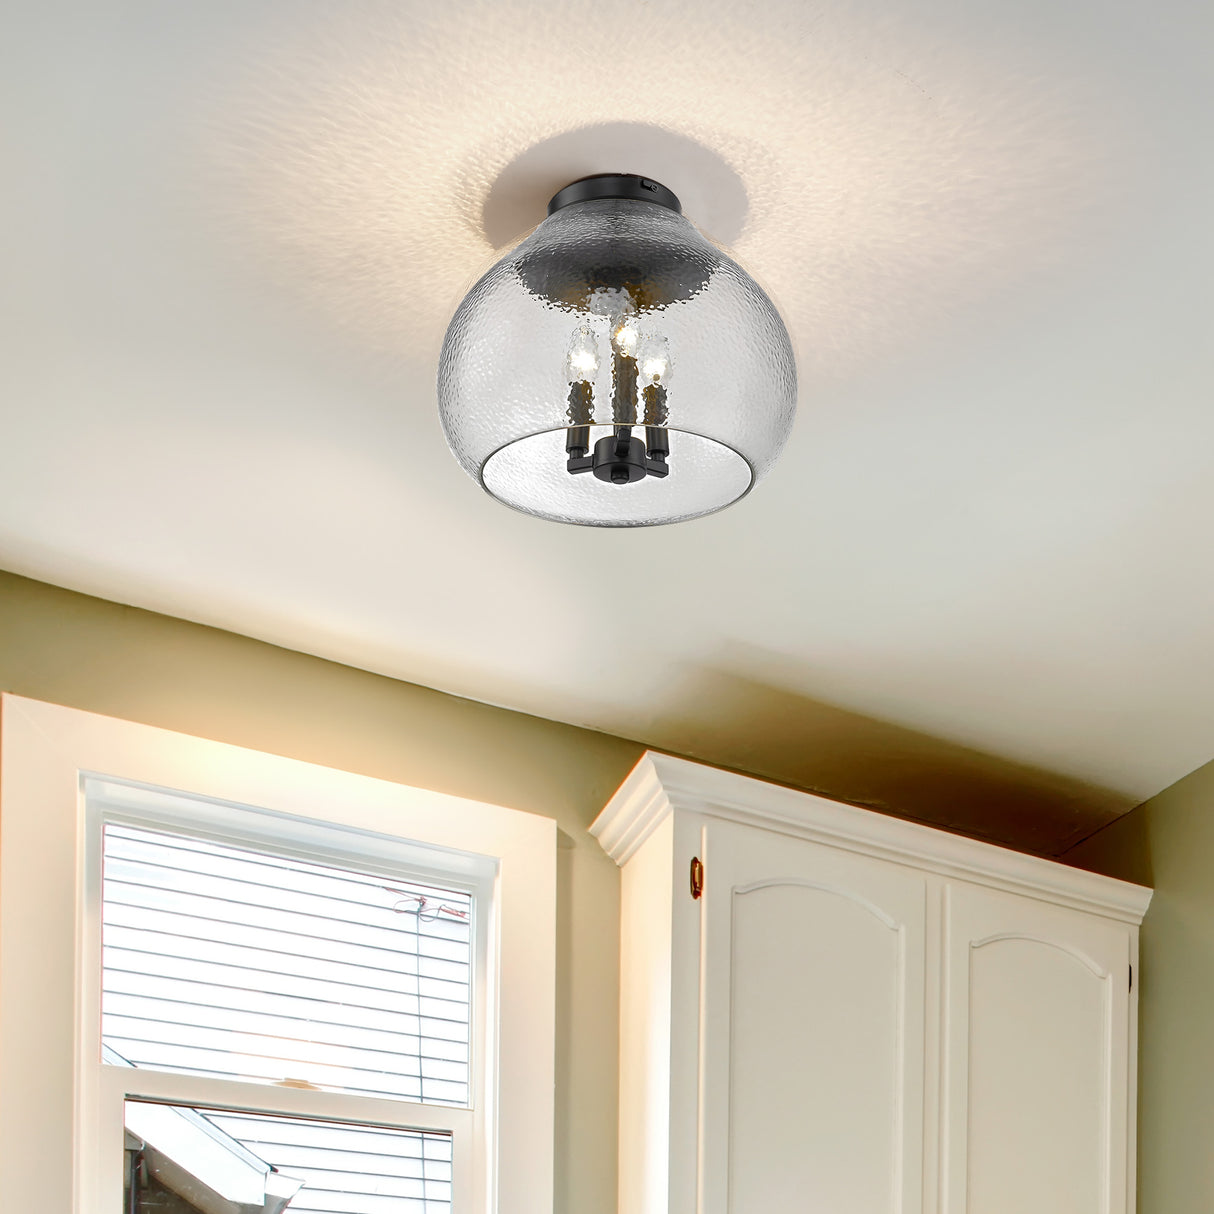 Ariella 3-Light Flush Mount in Matte Black with Hammered Clear Glass